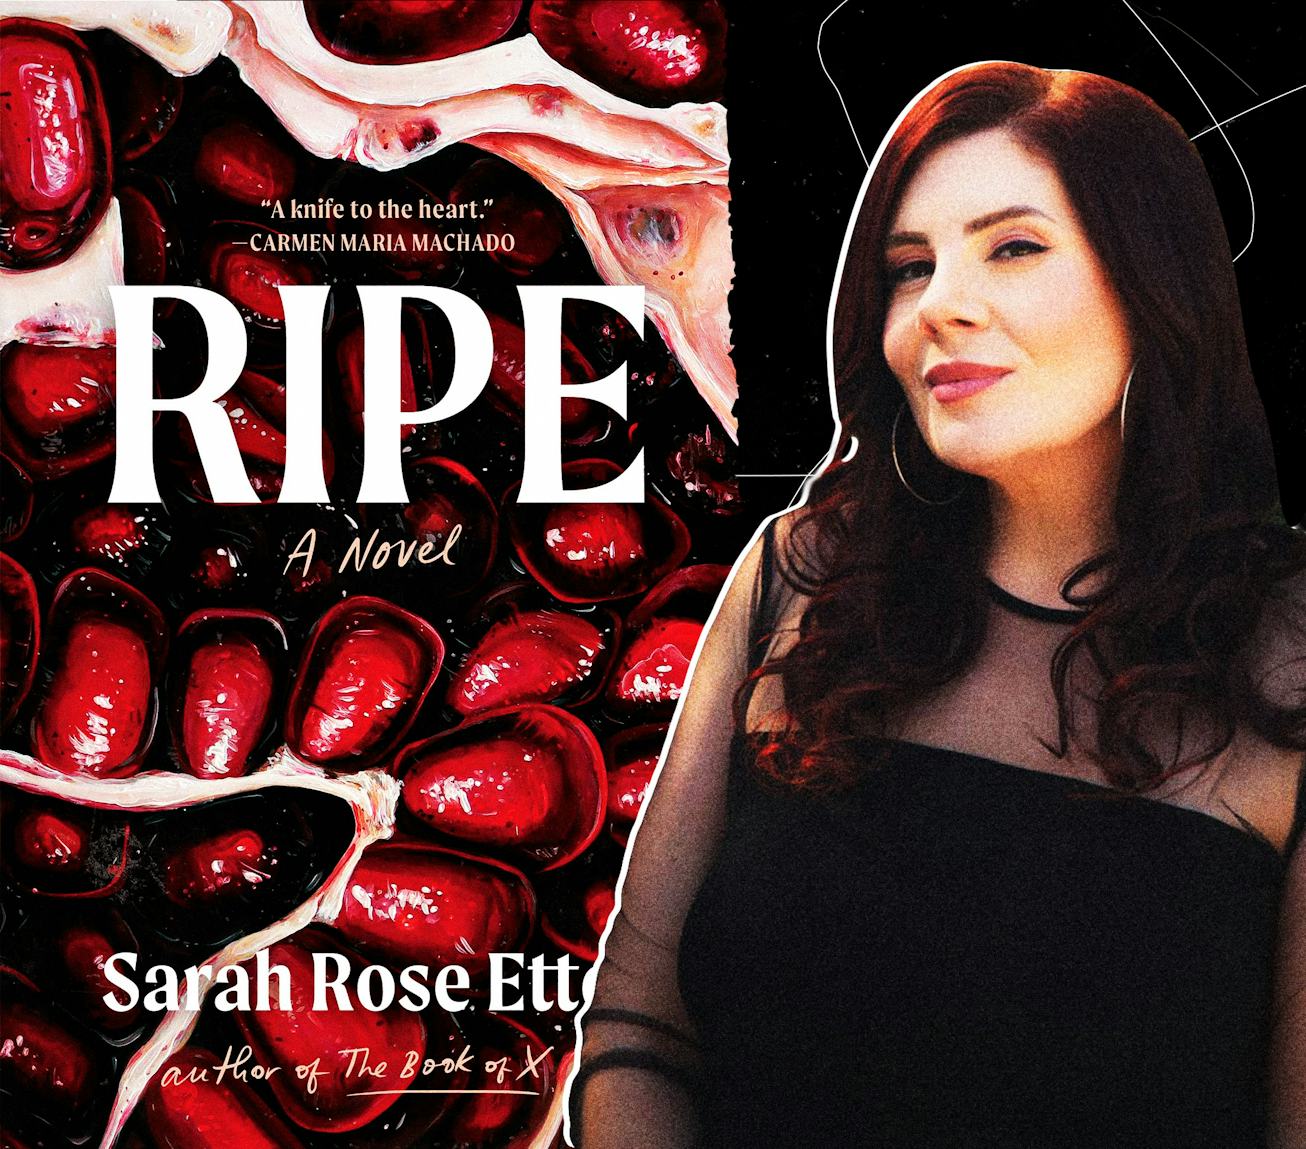 Sarah Rose Etter’s Ripe & The Rotted Underbelly Of Capitalism